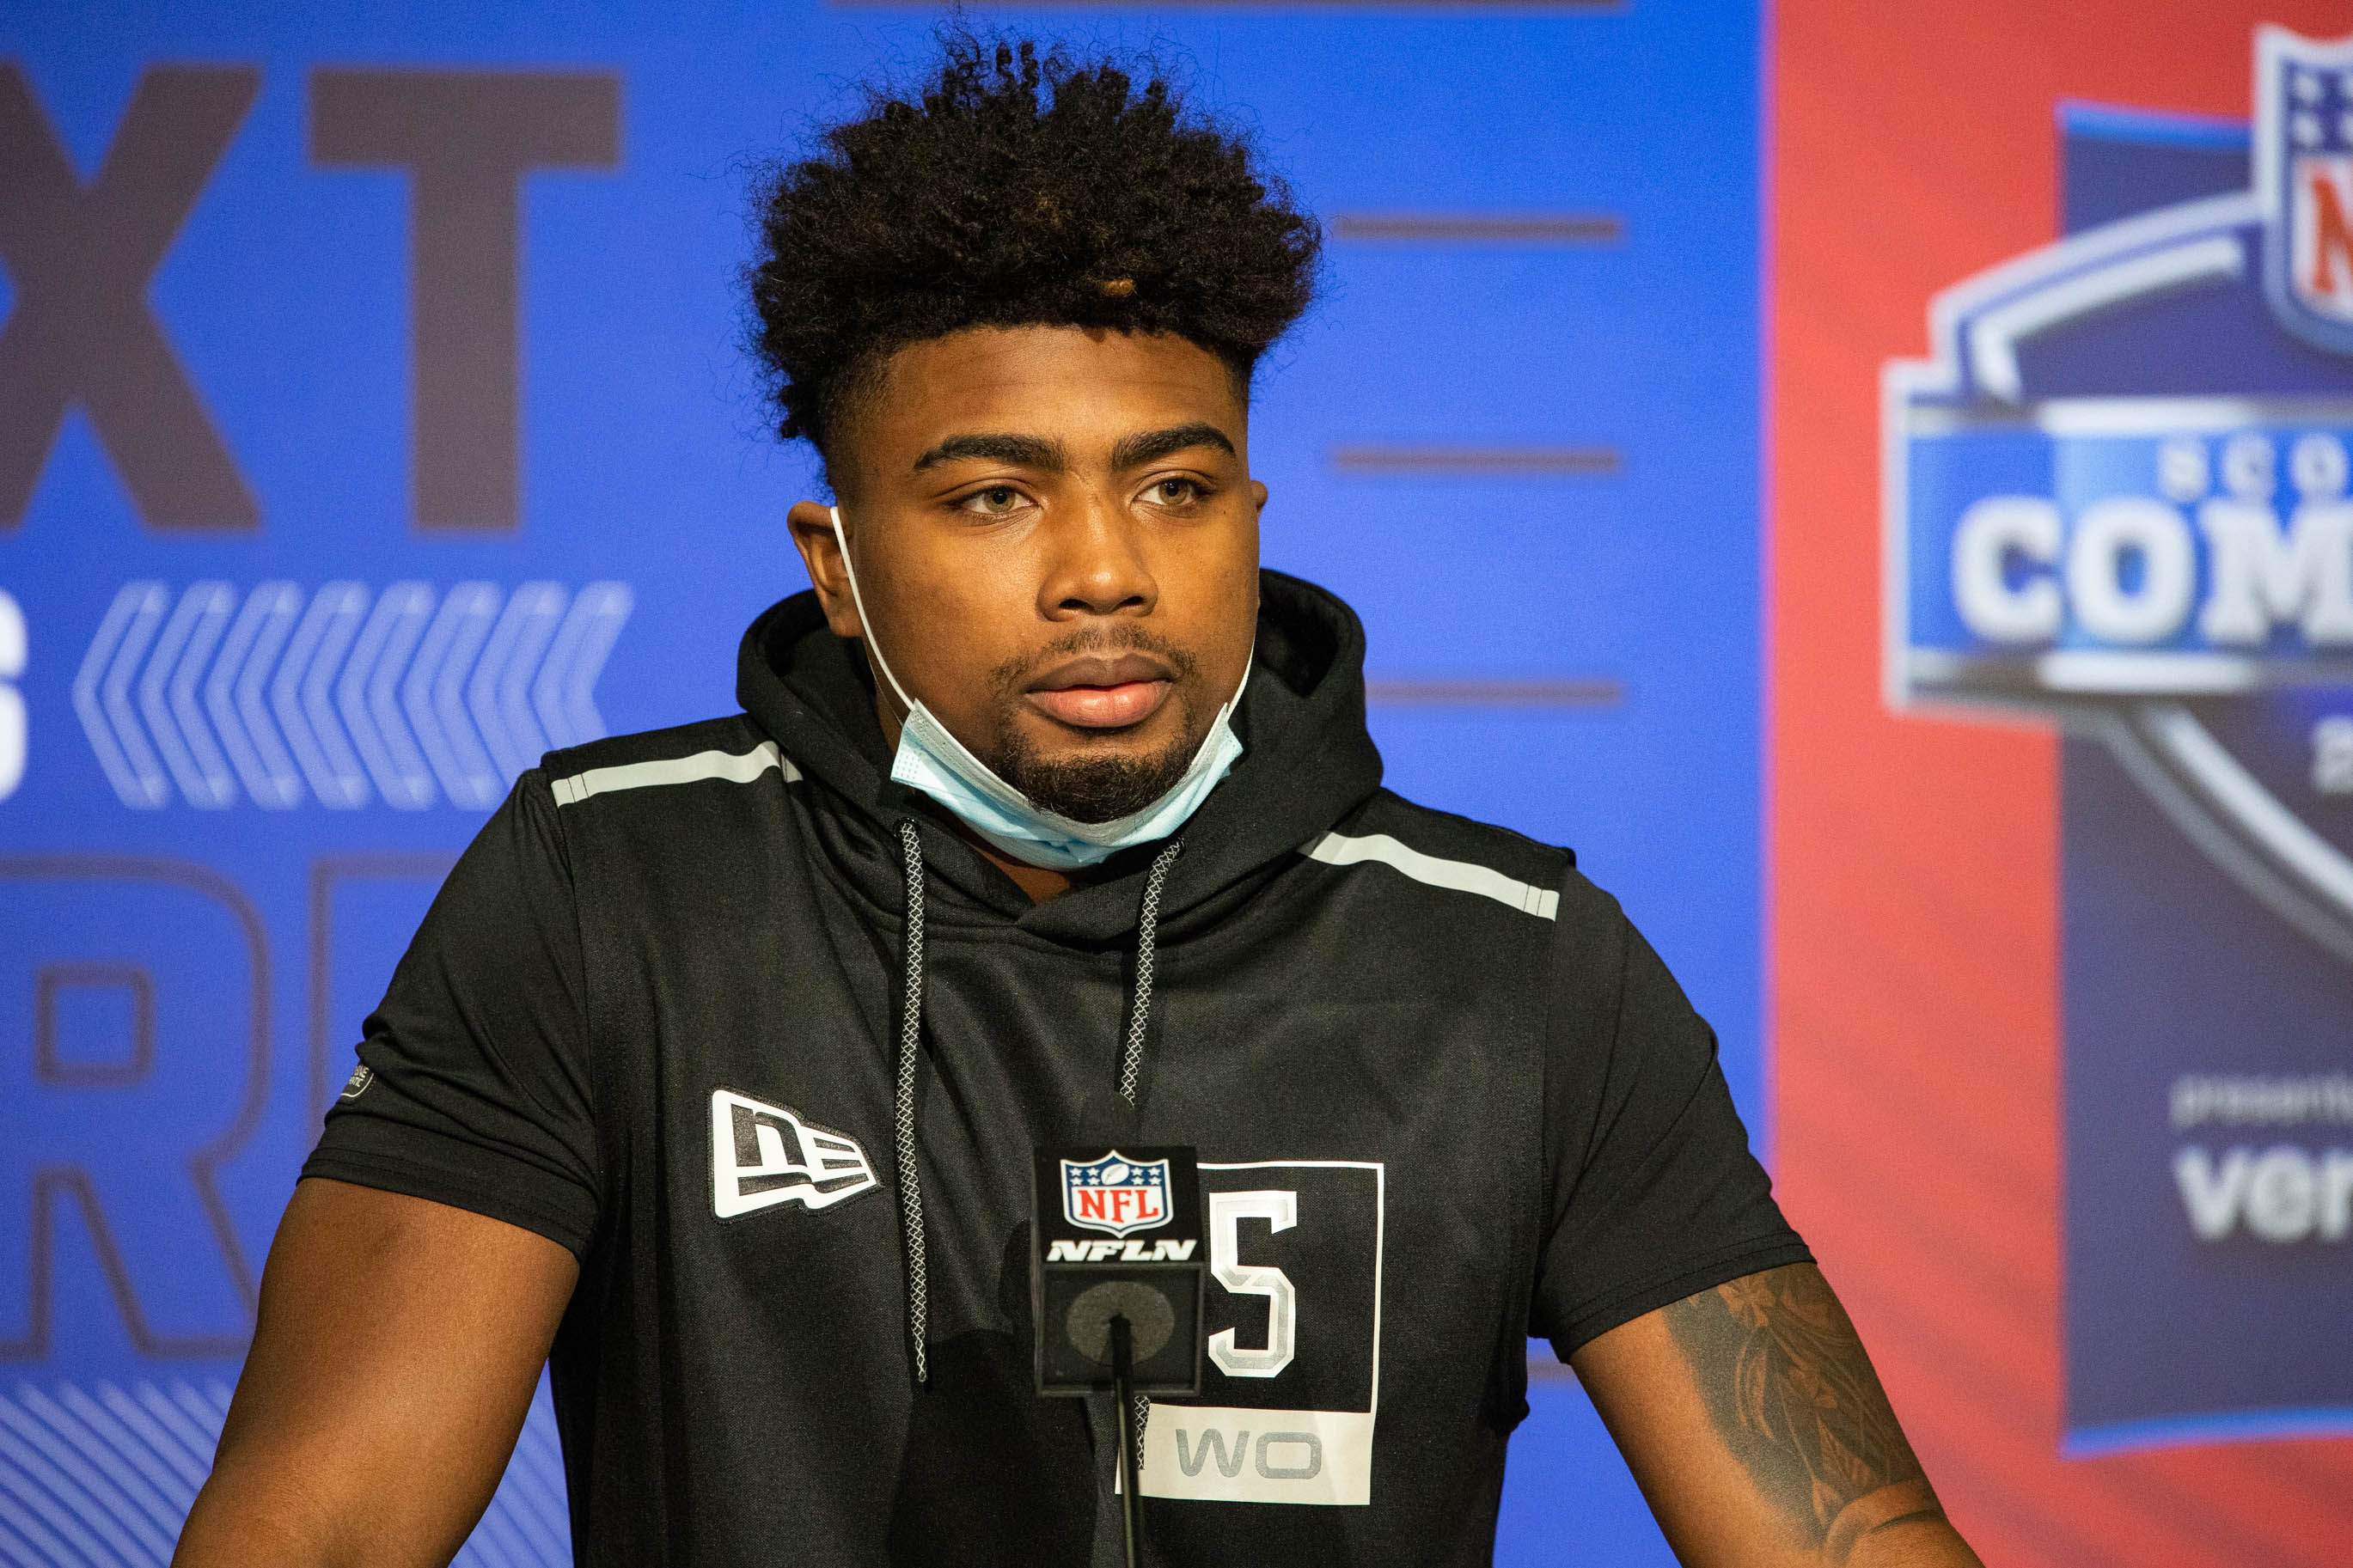 Mar 2, 2022; Indianapolis, IN, USA; Arkansa wide receiver Treylon Burks talks to the media during the 2022 NFL Combine. Mandatory Credit: Trevor Ruszkowski-USA TODAY Sports